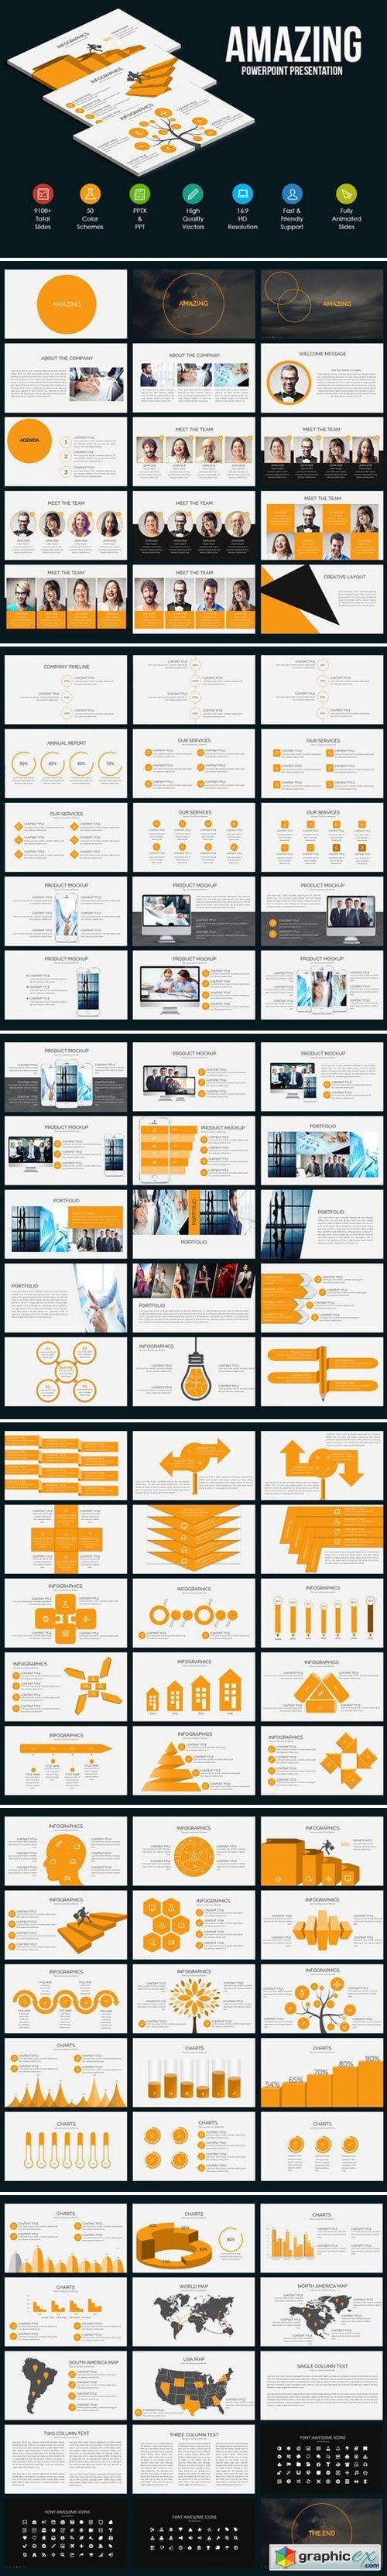 Amazing Powerpoint Template